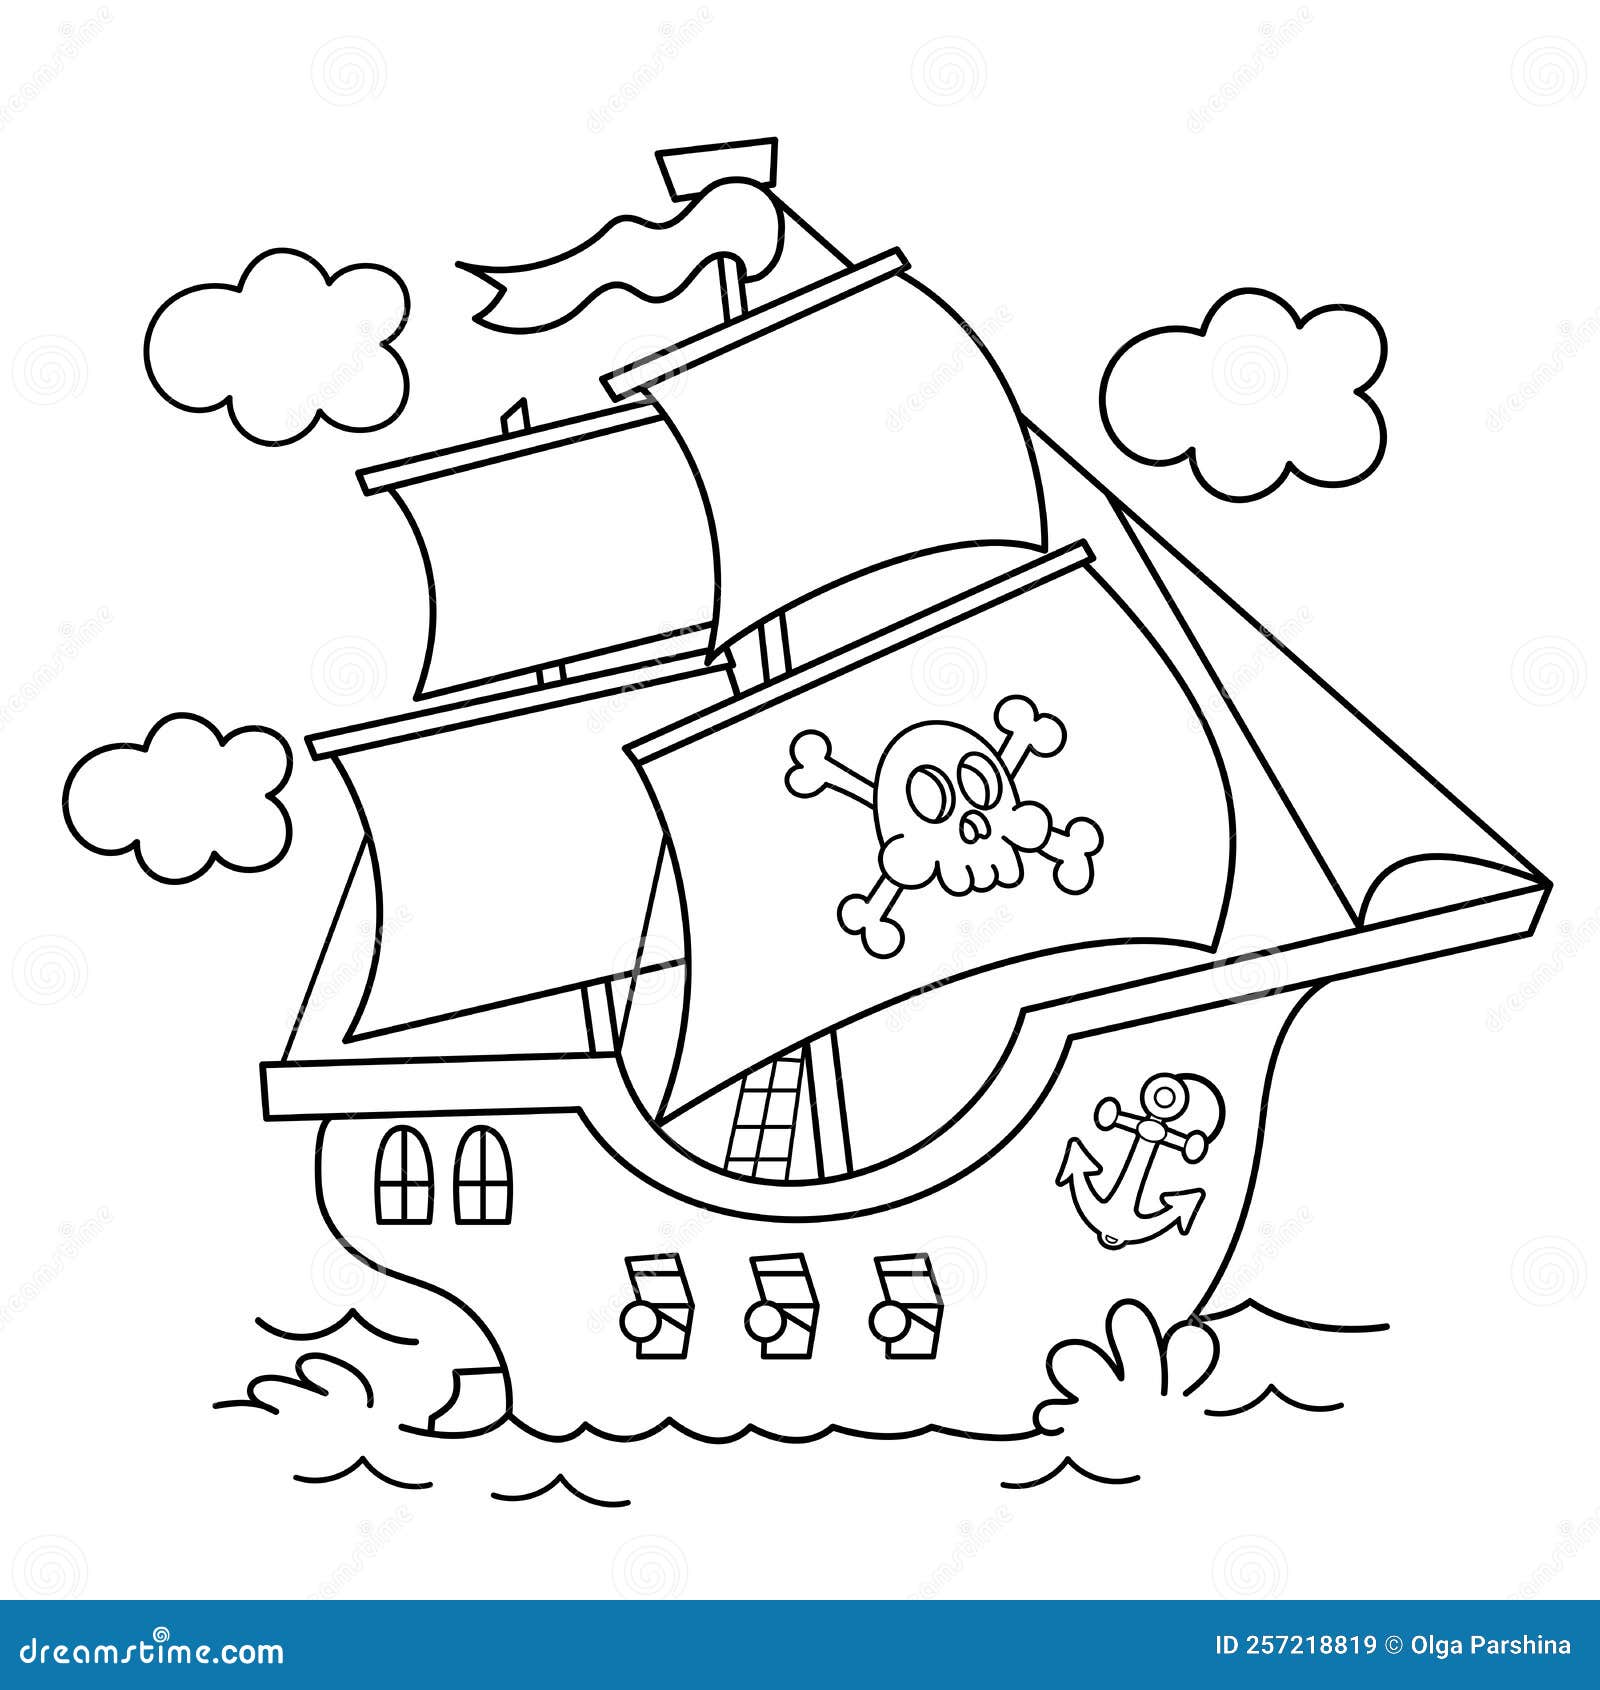 Coloring page outline of cartoon pirate ship sailboat with black sails with skull in sea drawing stock vector